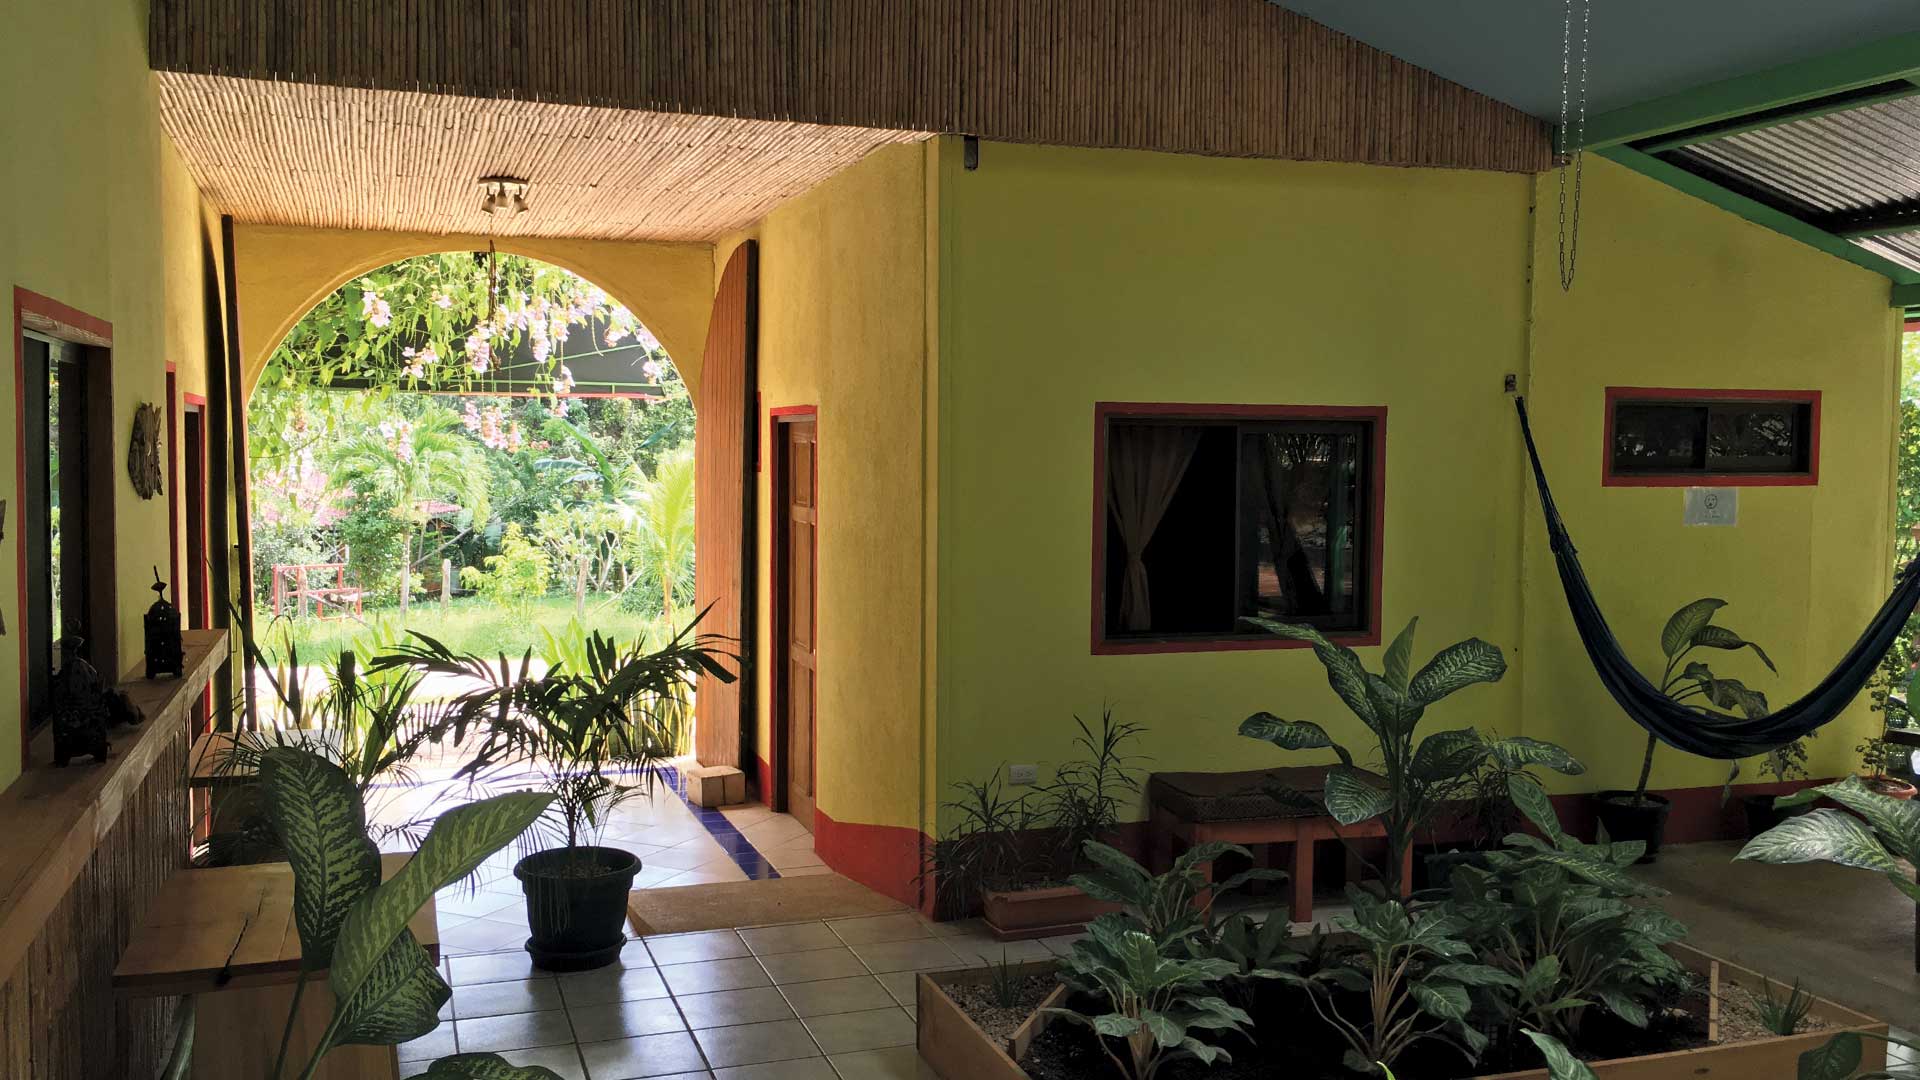 Main entrance and indoor gardens and boutique hotel in Playa Grande, Costa Rica